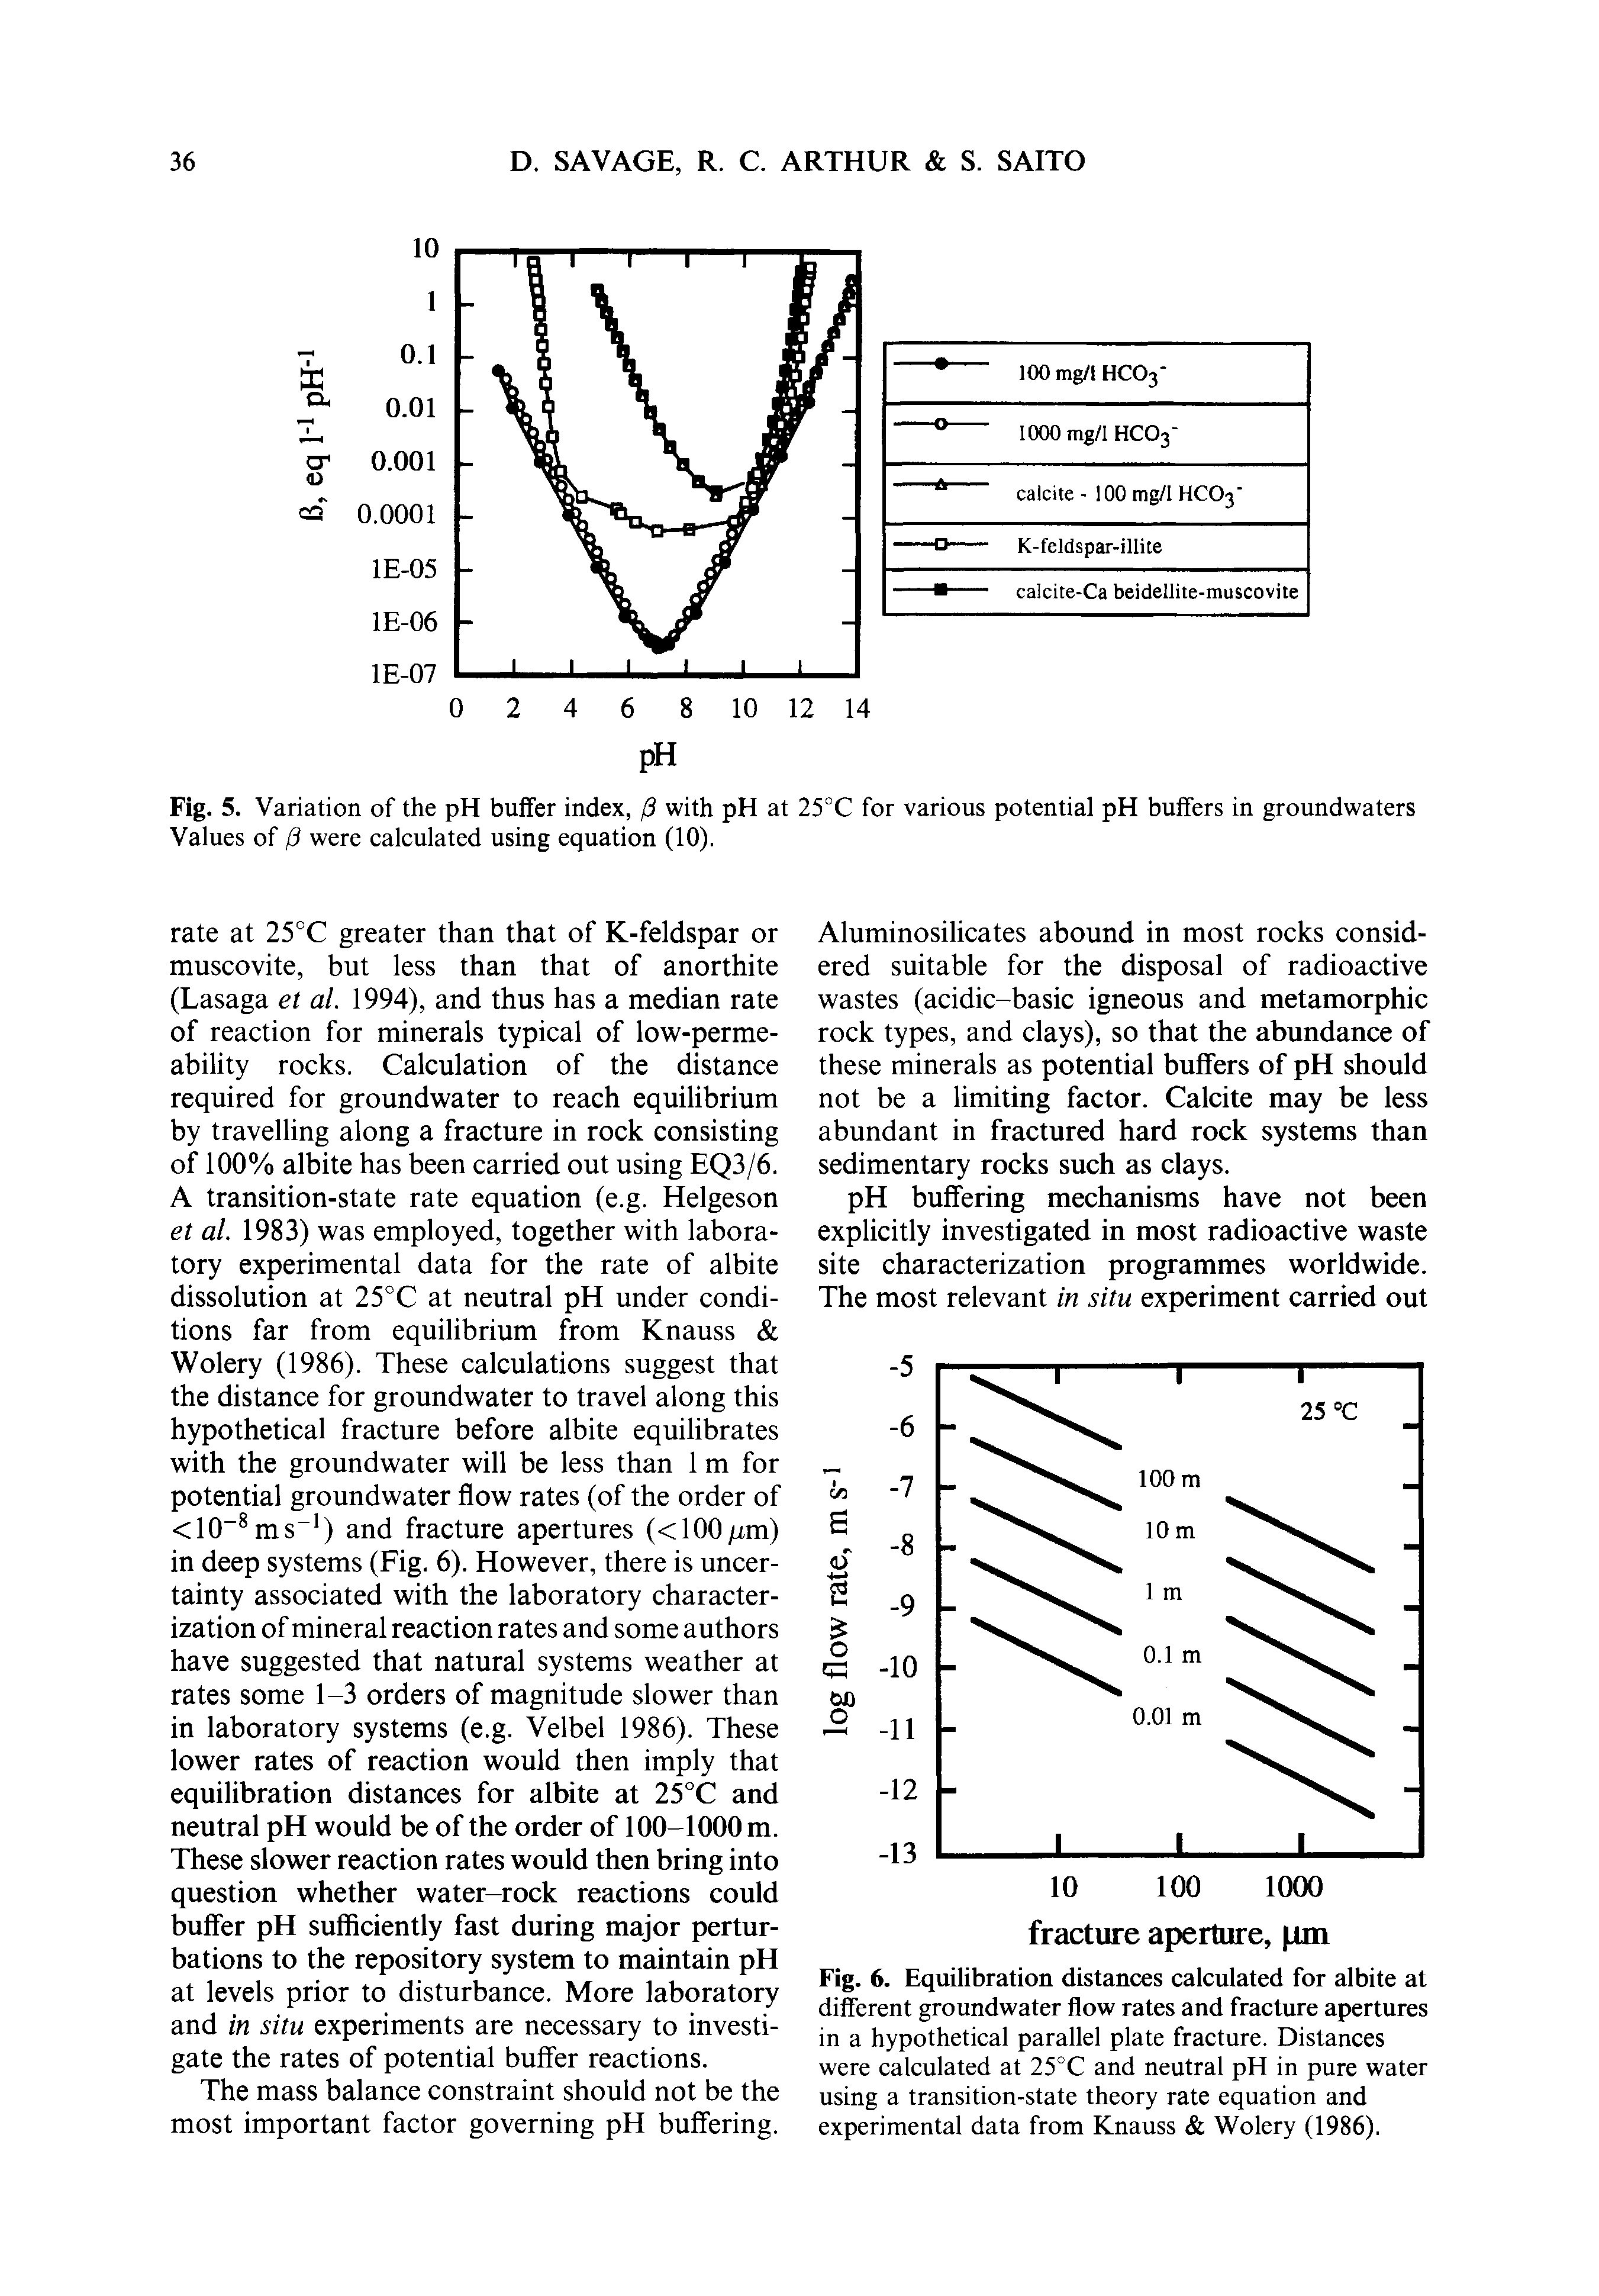 Fig. 6. Equilibration distances calculated for albite at different groundwater flow rates and fracture apertures in a hypothetical parallel plate fracture. Distances were calculated at 25°C and neutral pH in pure water using a transition-state theory rate equation and experimental data from Knauss Wolery (1986).